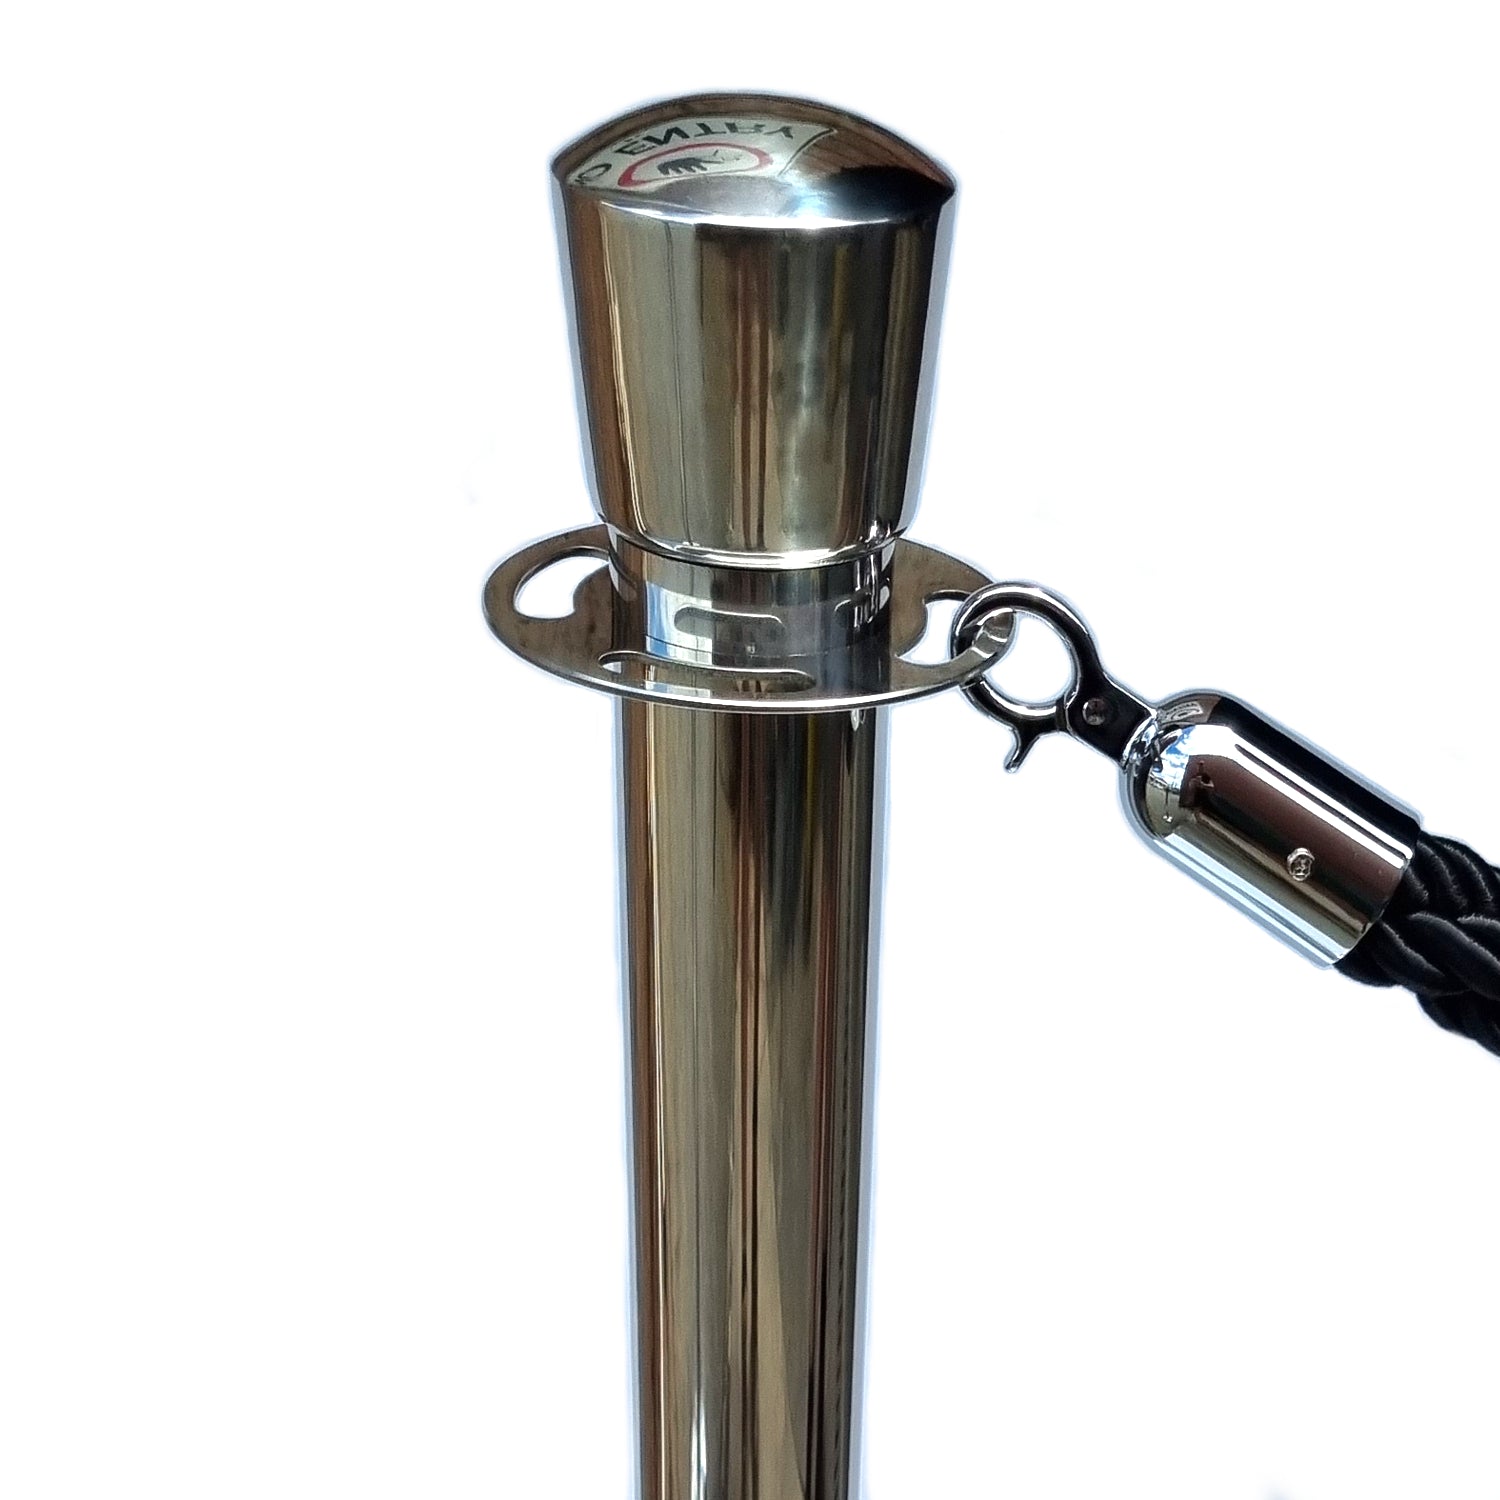 Traditional bollard in a chrome finish, 1 metre high. Matching rope is also available. Shop chain.com.au